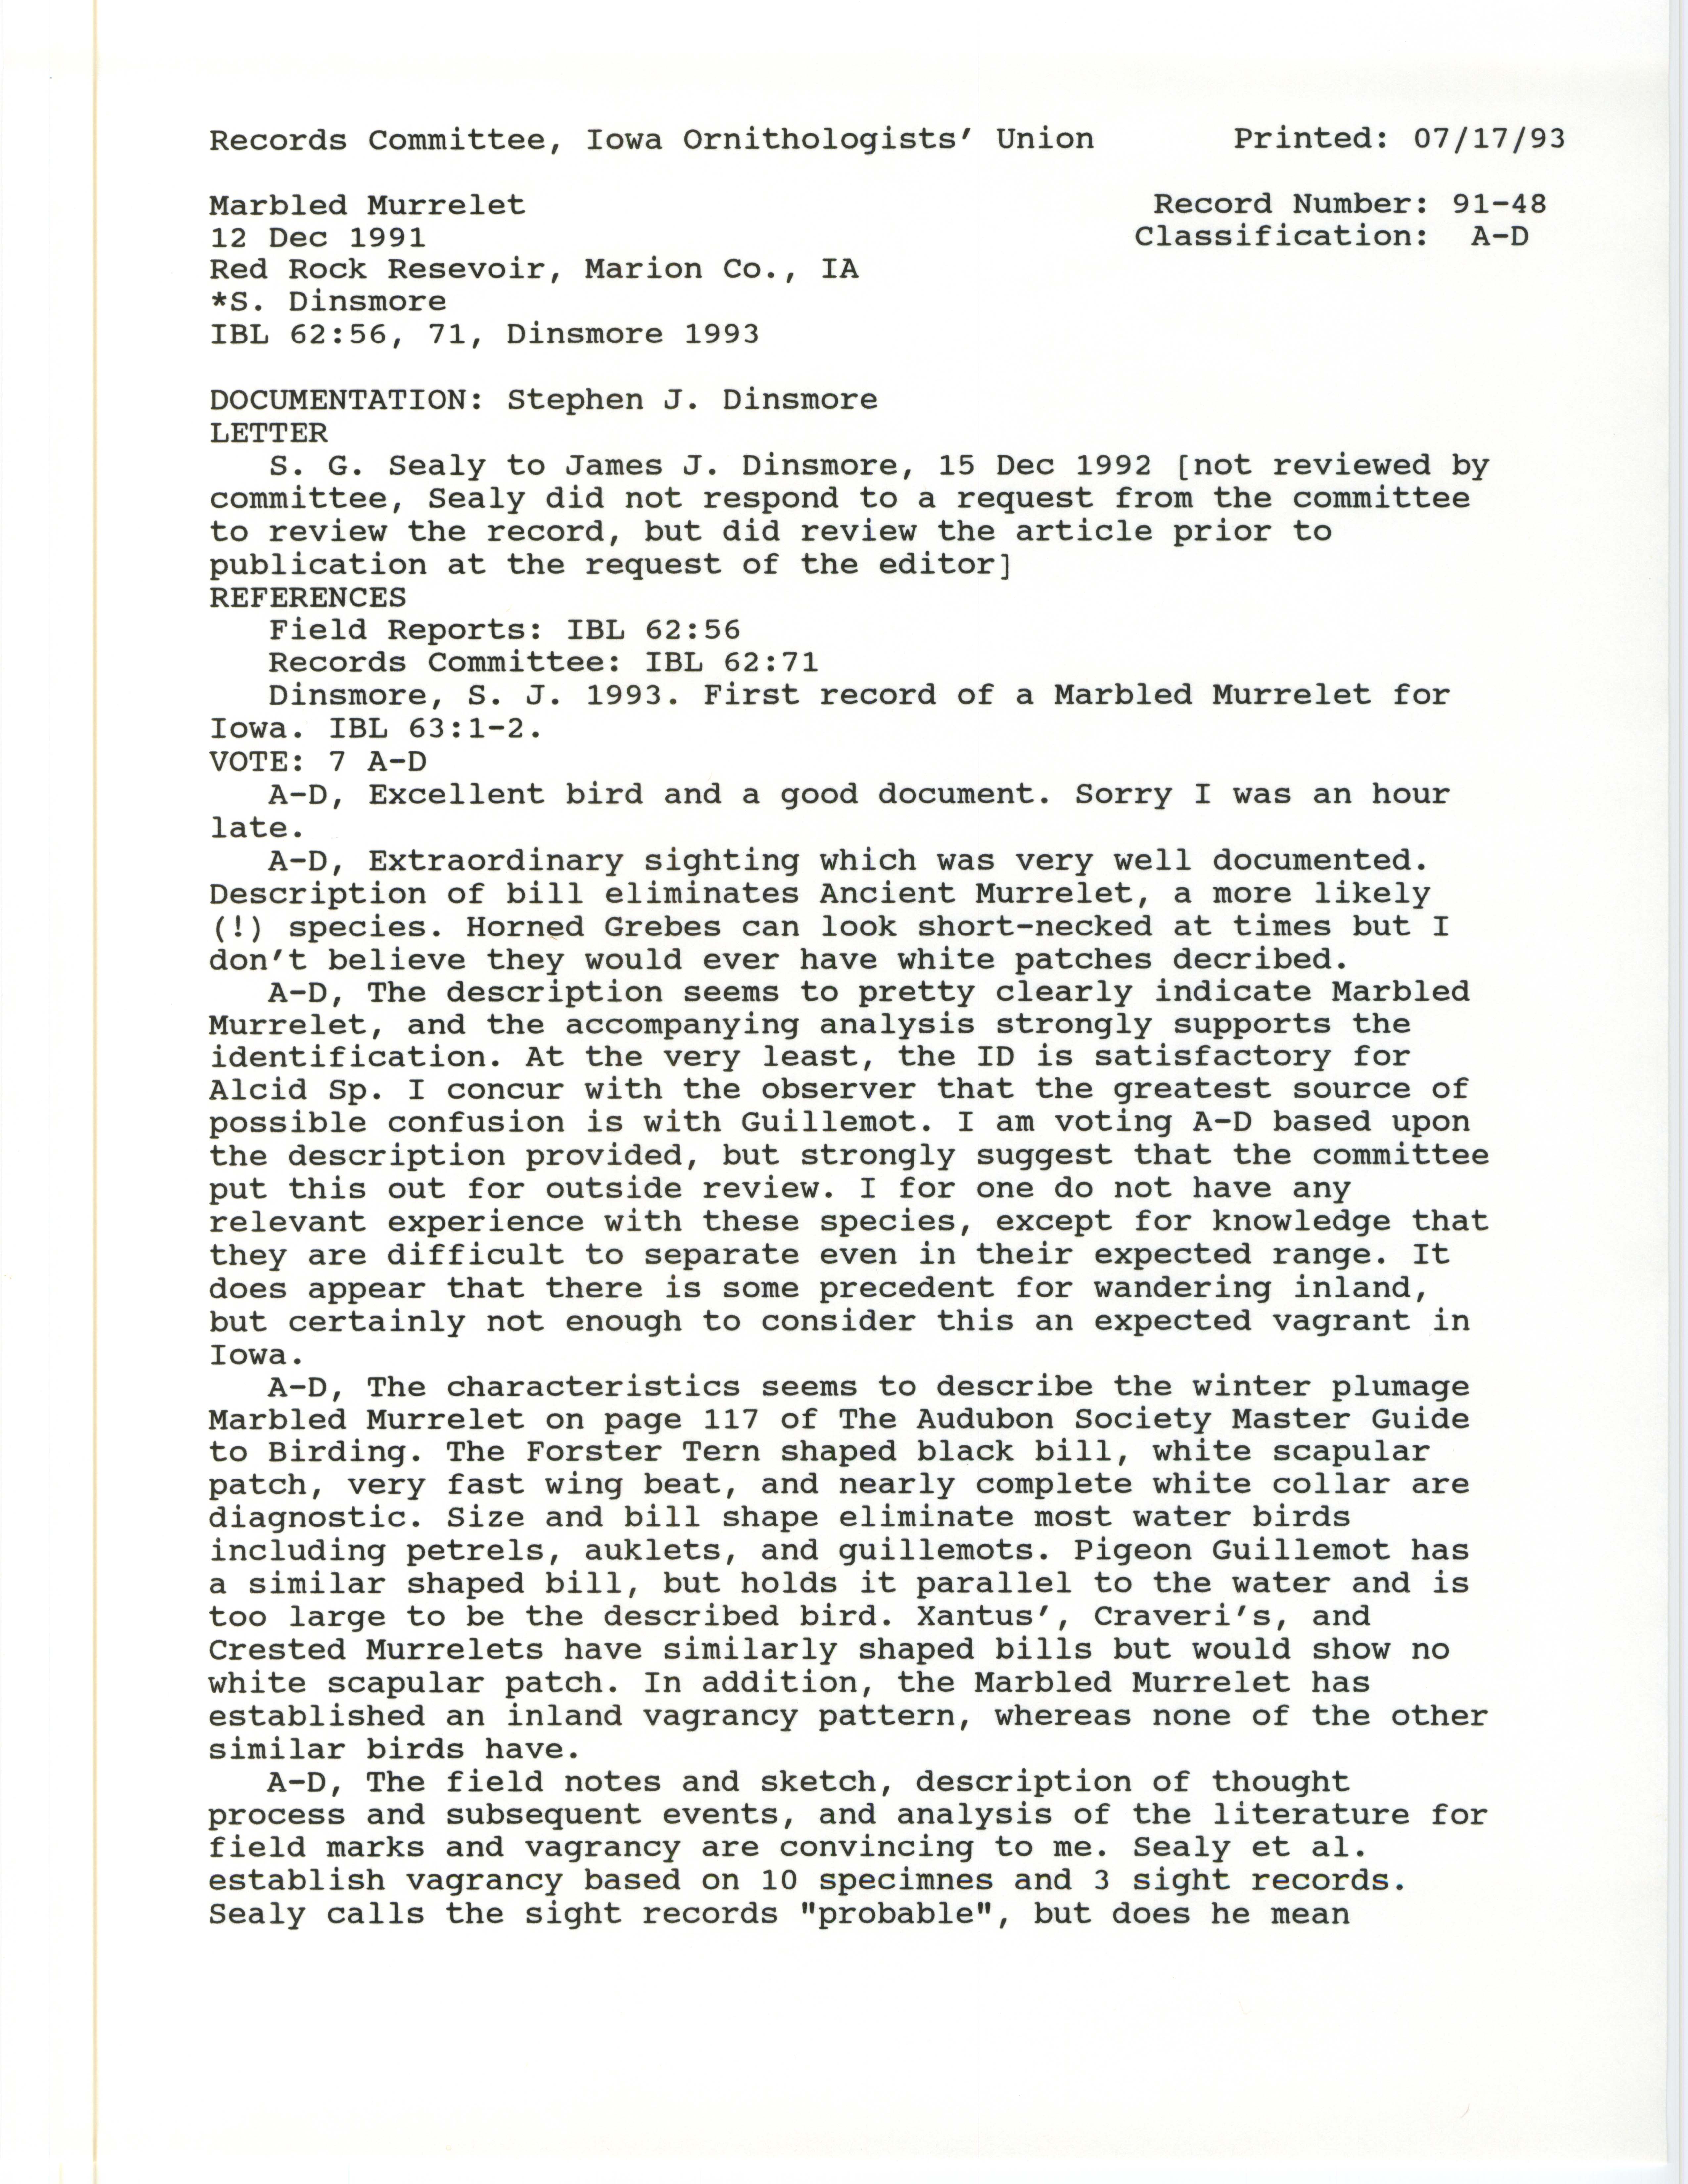 Records Committee review for rare bird sighting of Marbled Murrelet at Whitebreast Cove at Red Rock Reservoir, 1991